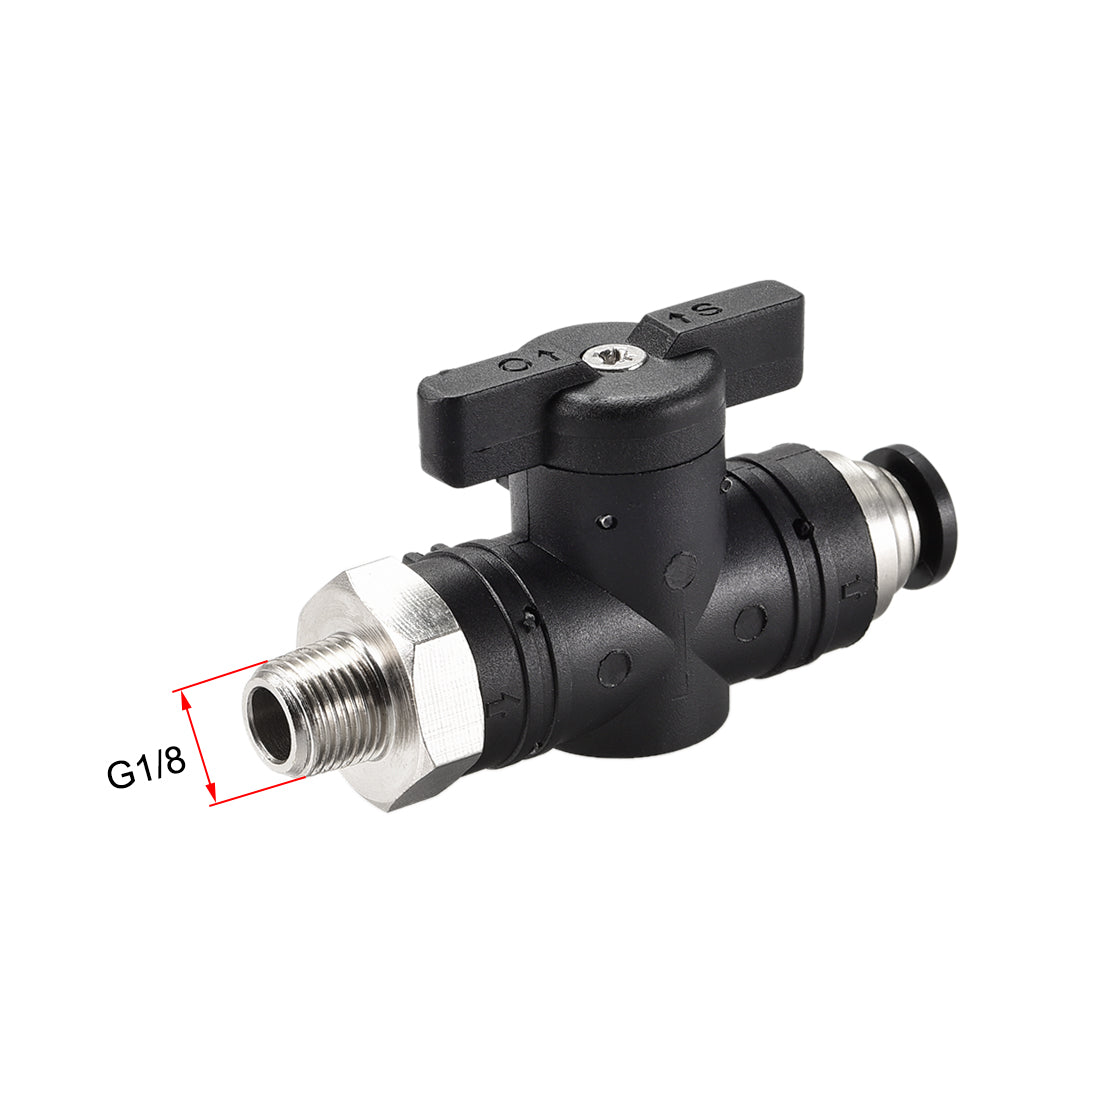 uxcell Uxcell Pneumatic Ball Valve, G1/8 to 6mm Inner Diameter, for Air Flow Control, Plastic Nickel Plated Brass Black